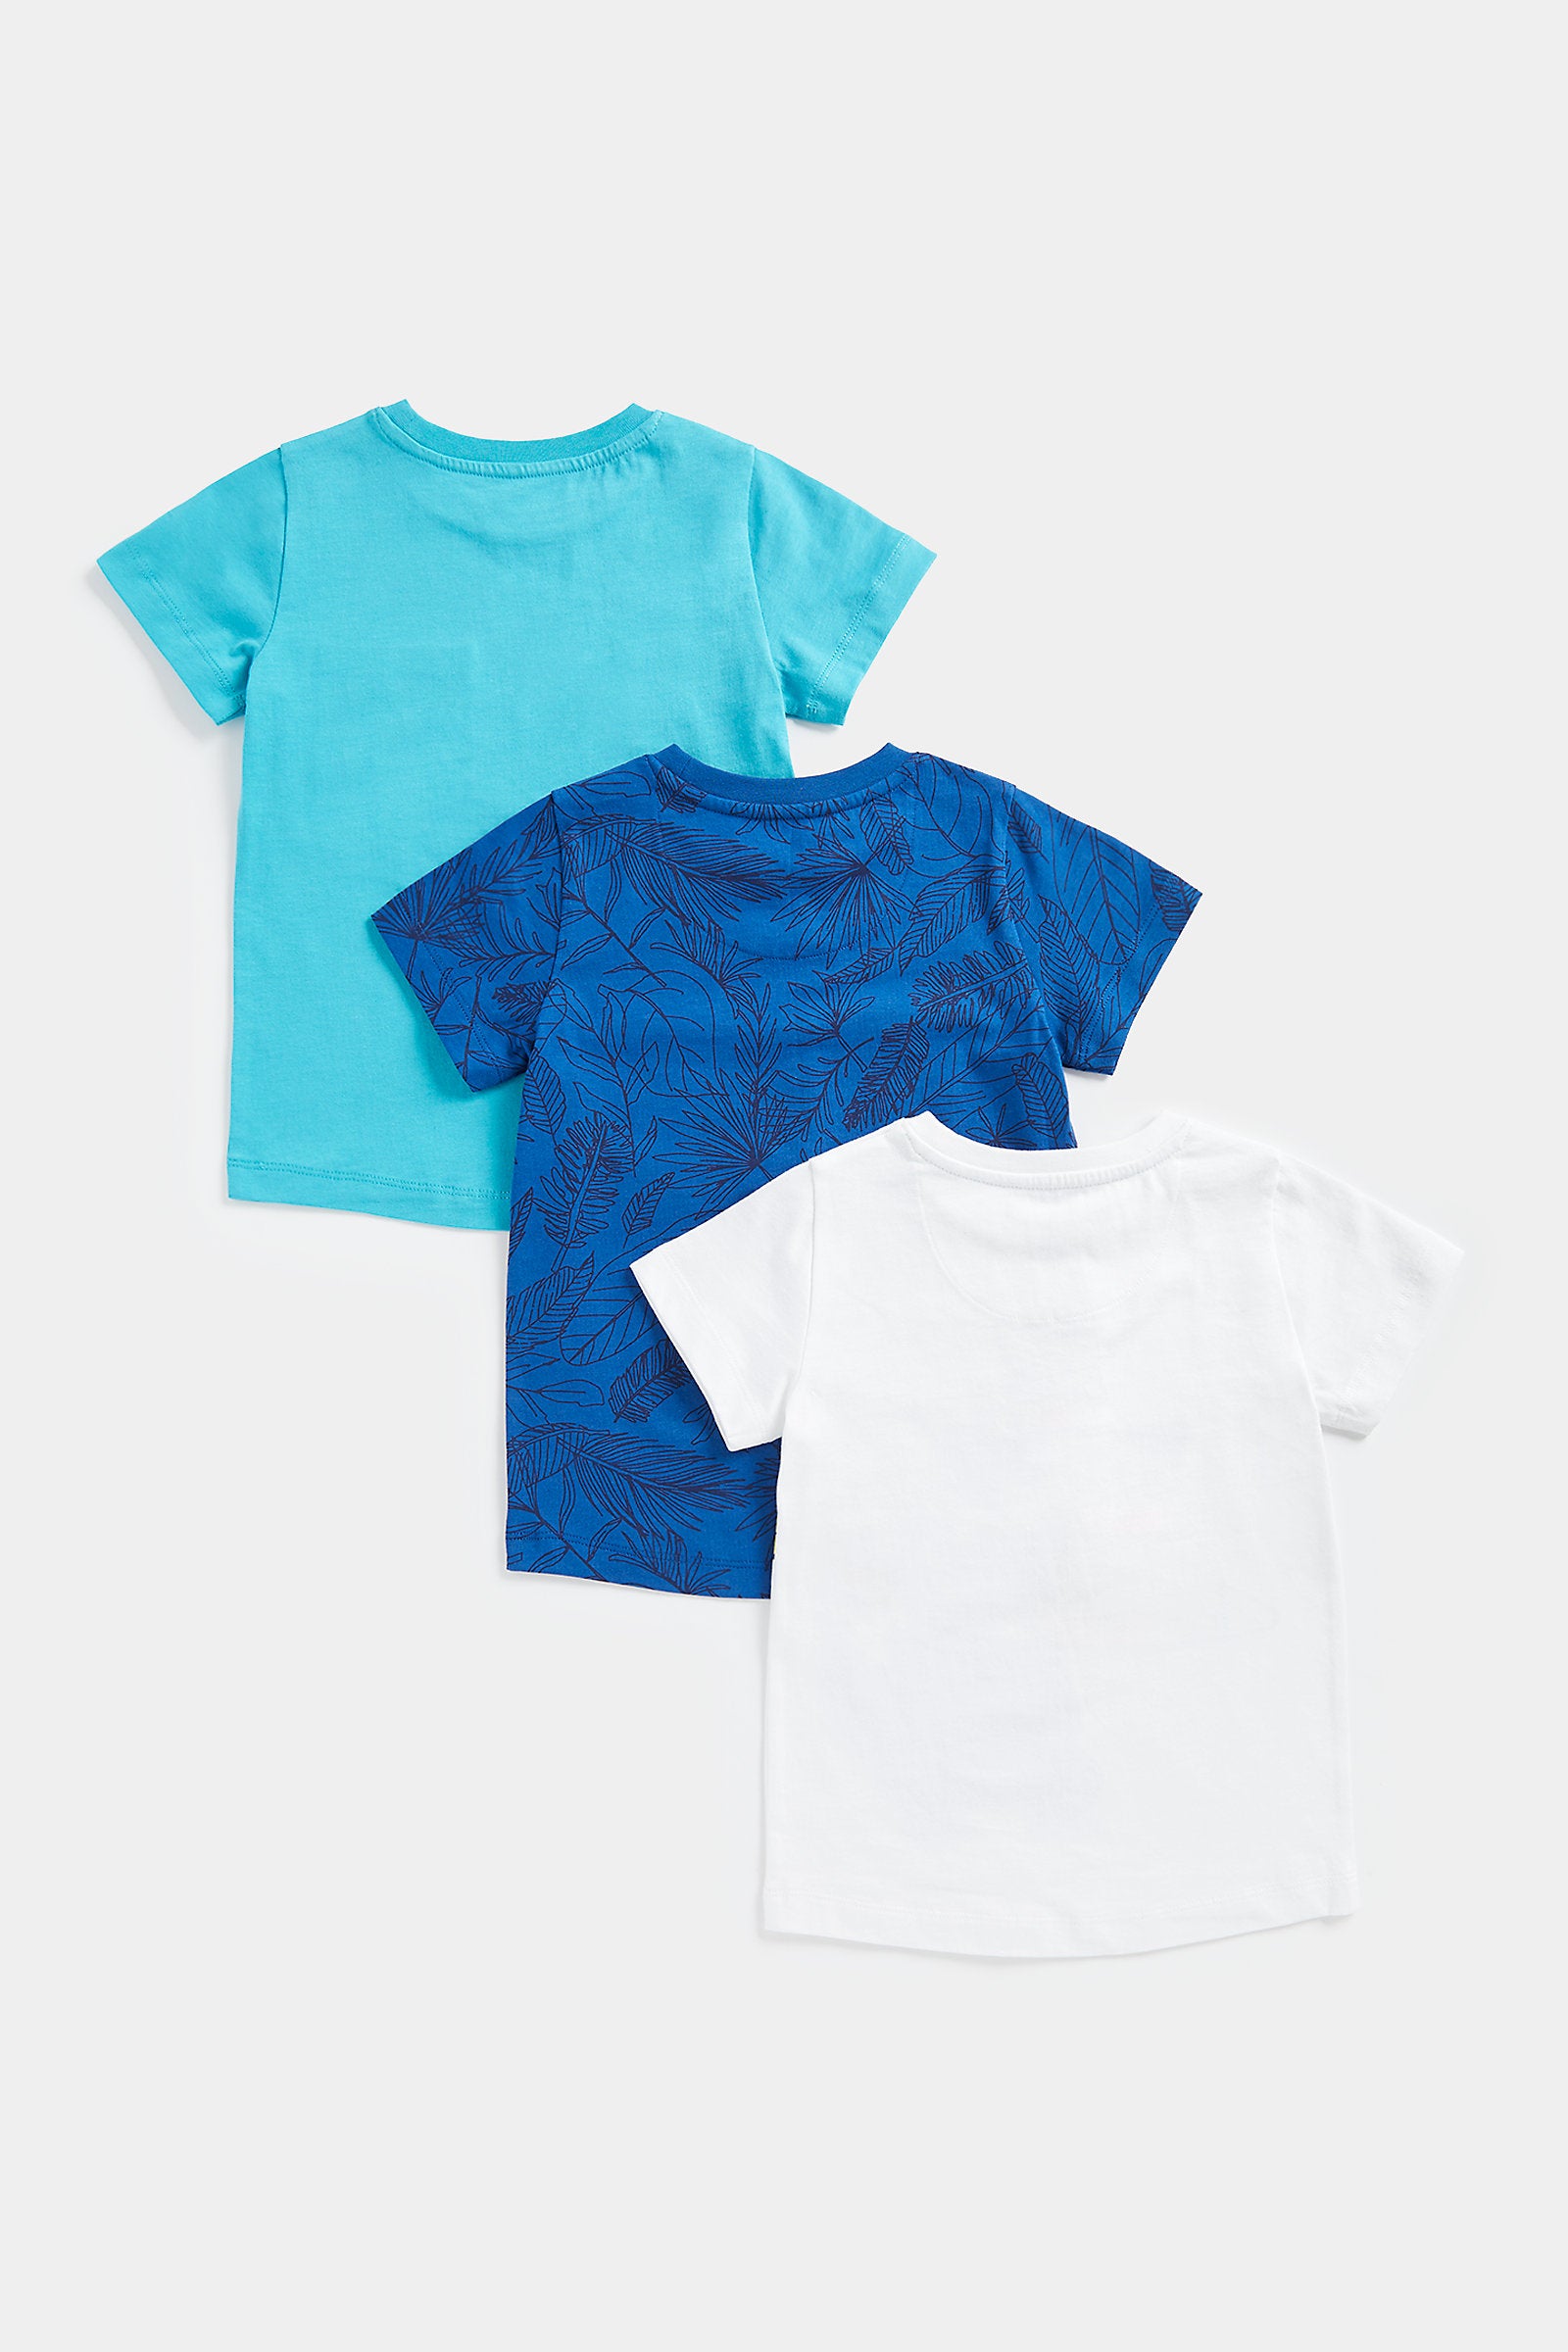 Surfer T-Shirts - 3 Pack